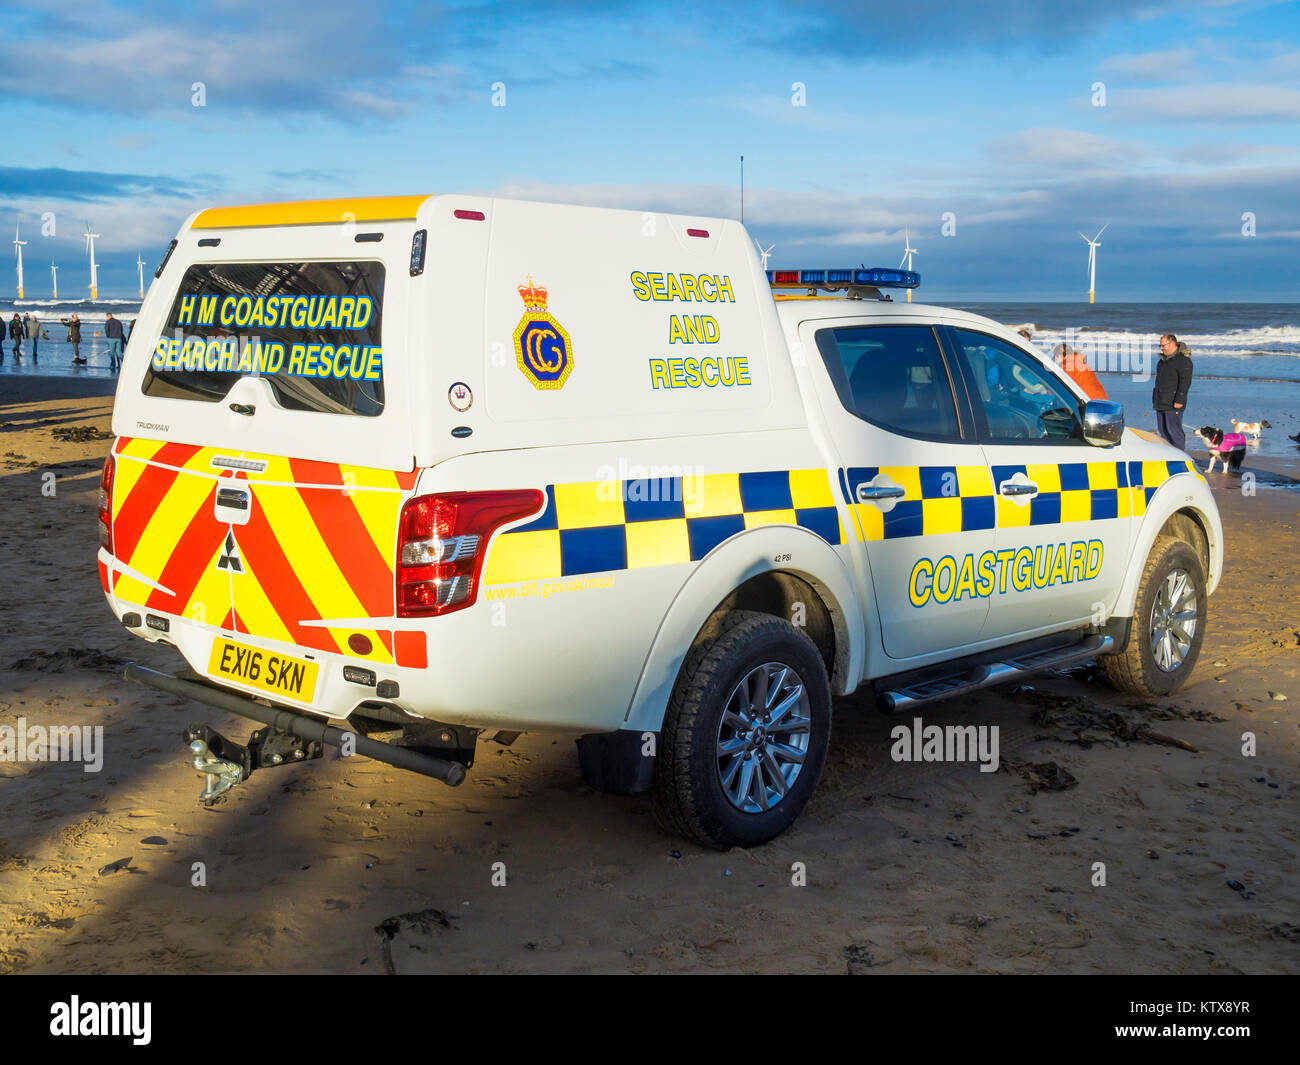 Coastguard Search and Rescue vehicle on the Beach at Redcar during the annual Boxing Day Charity Dip when people in fancy dress go into the North Sea Stock Photo